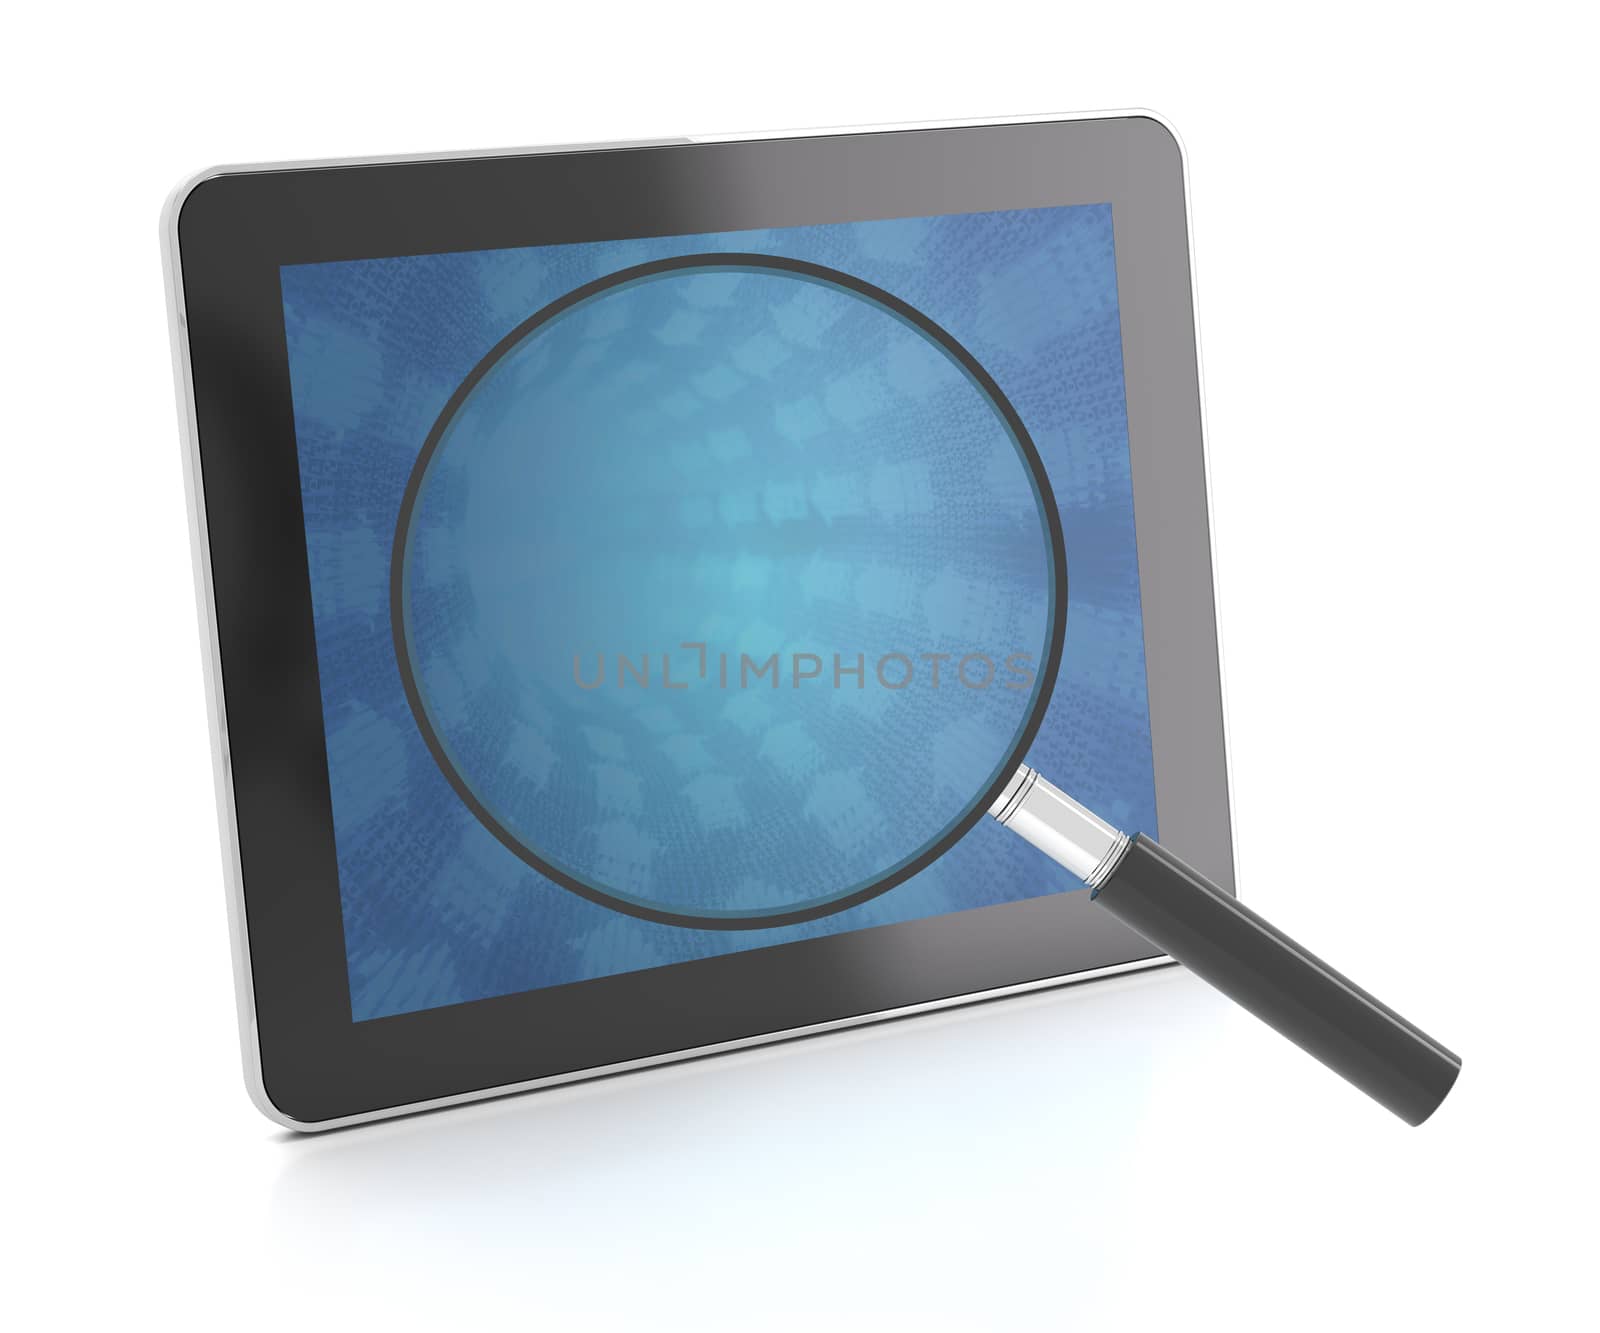 Digital tablet with magnifying glass, 3d render by ymgerman